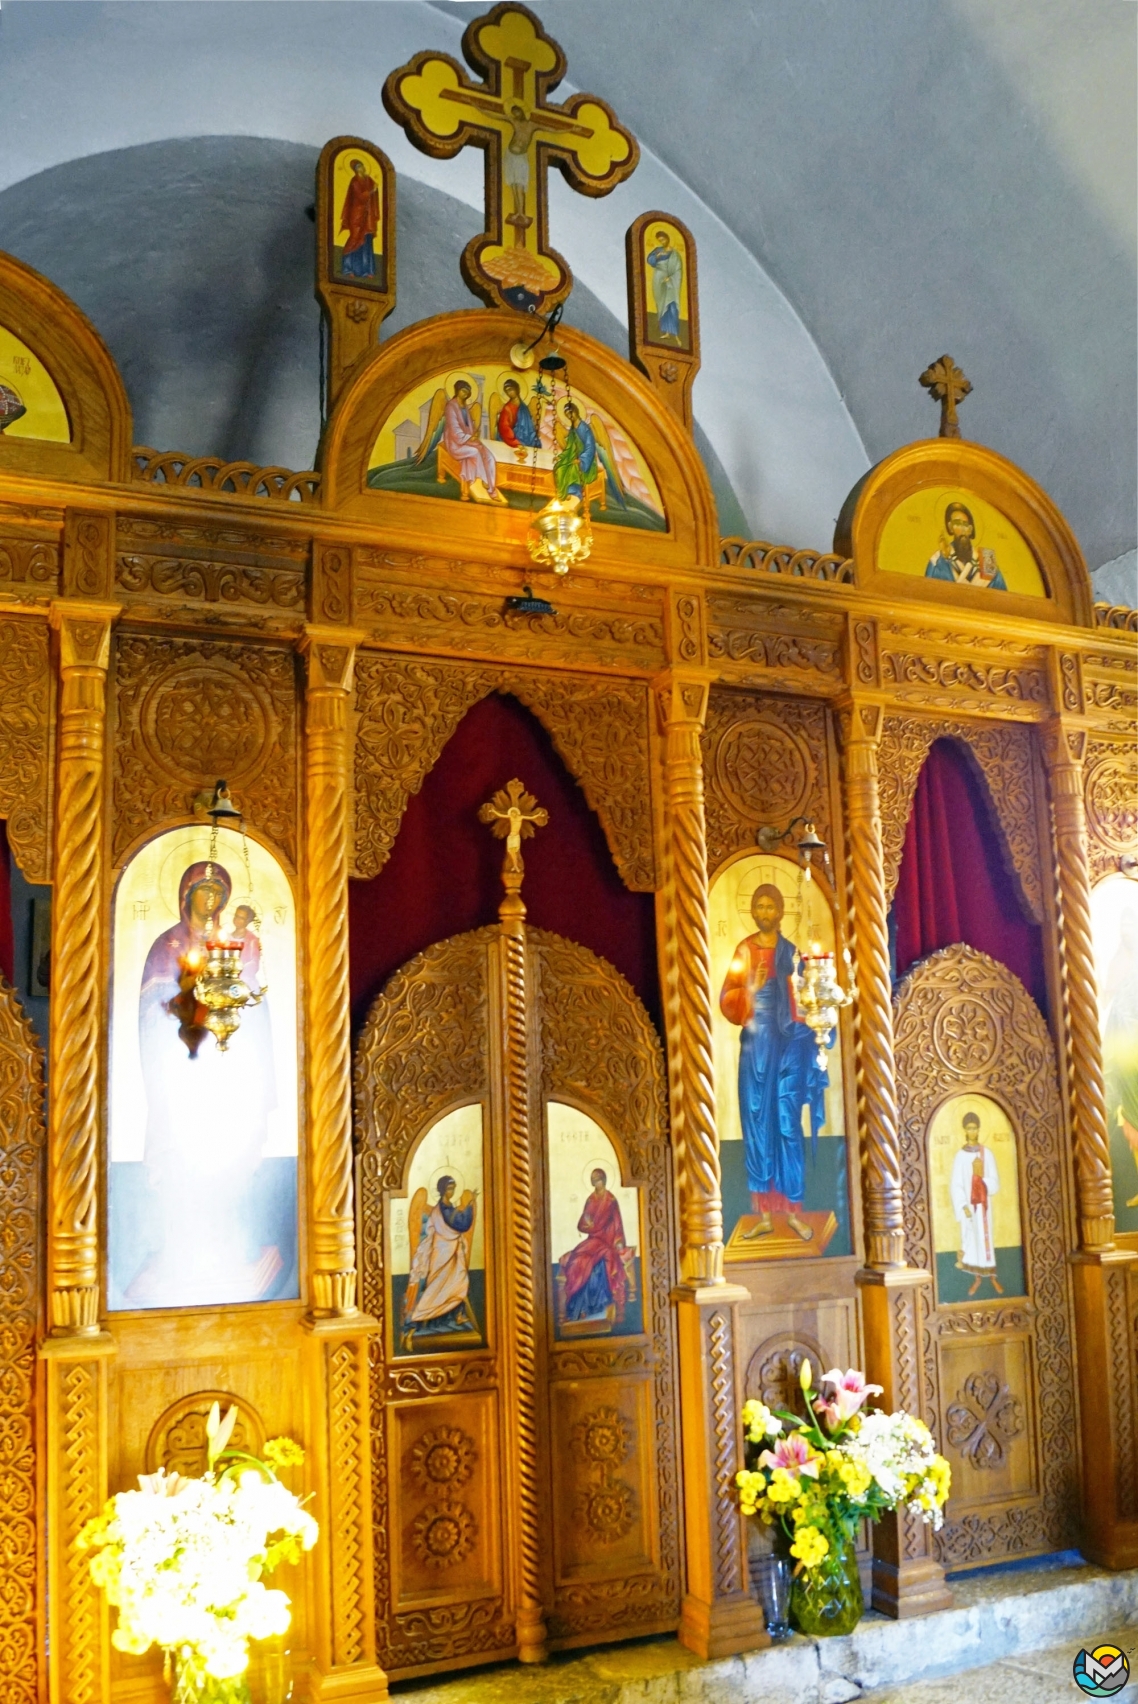 The monastery of St. Michael the Archangel